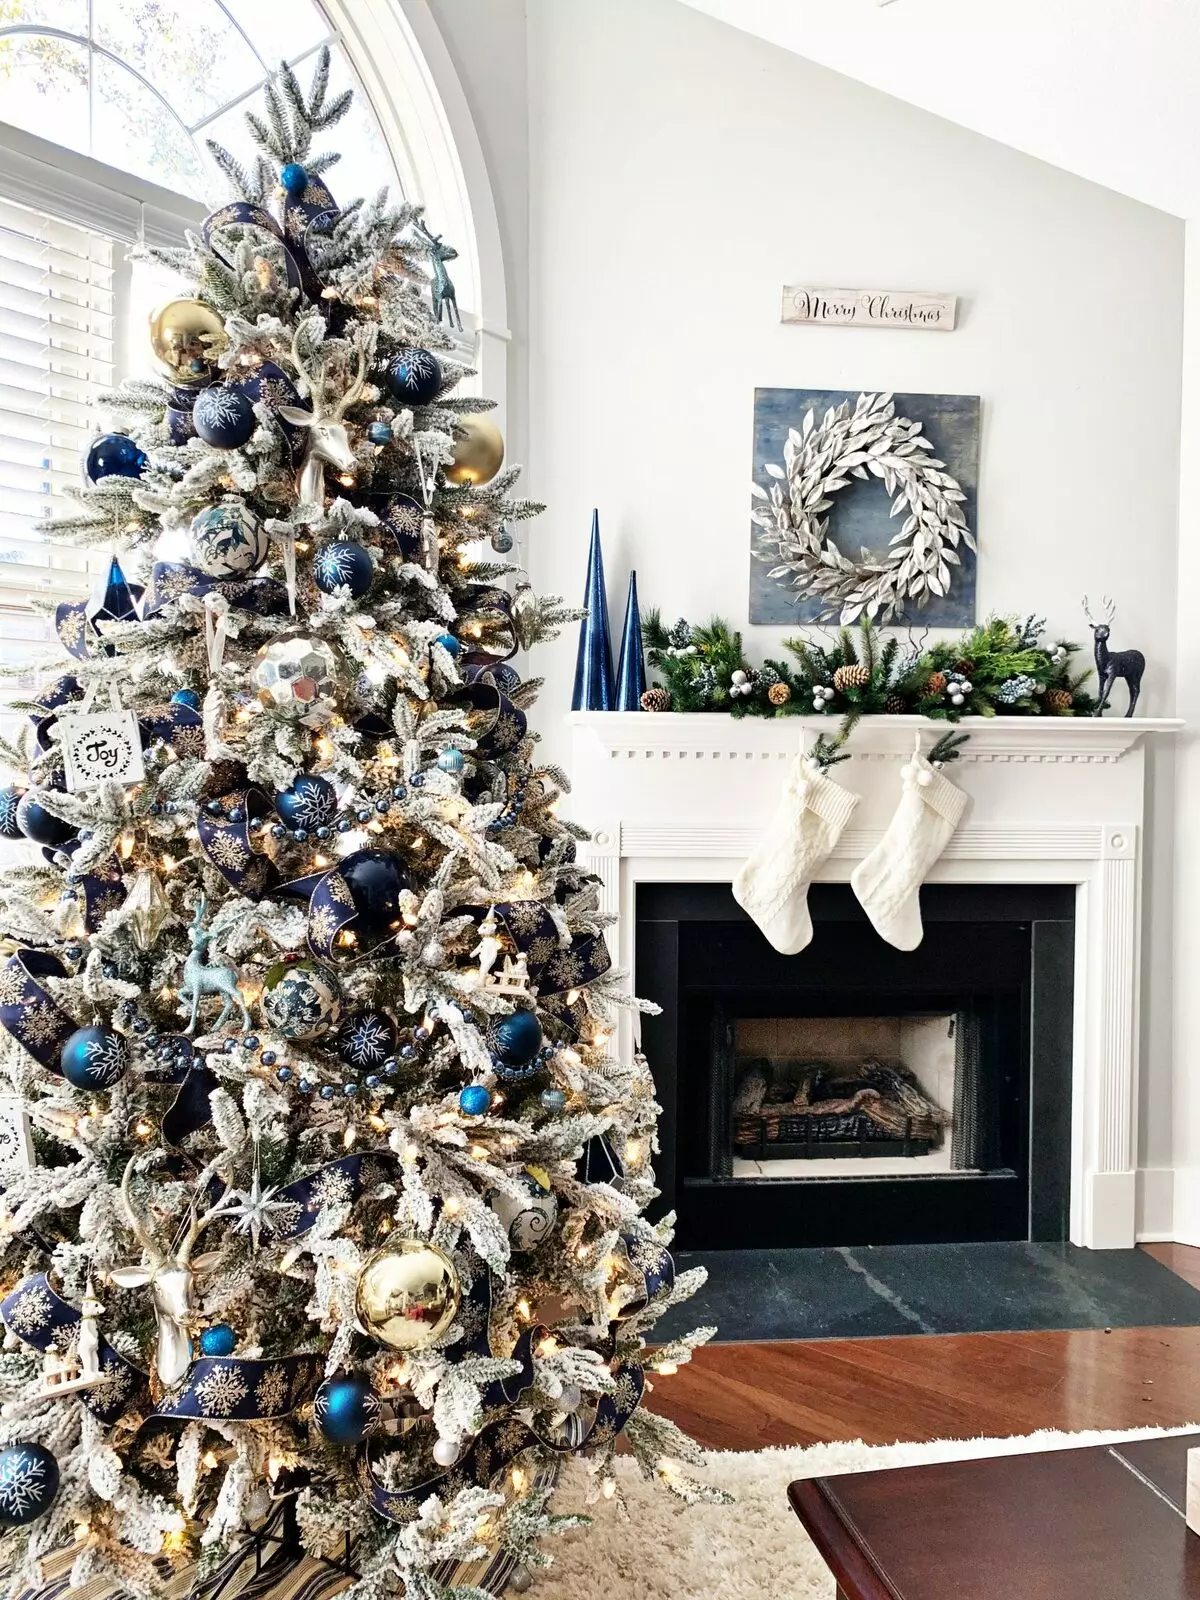 How to decorate the Christmas tree in blue-silver color? 30 photos How to dress up with balls and other decorations in blue and silver tones? 7627_4